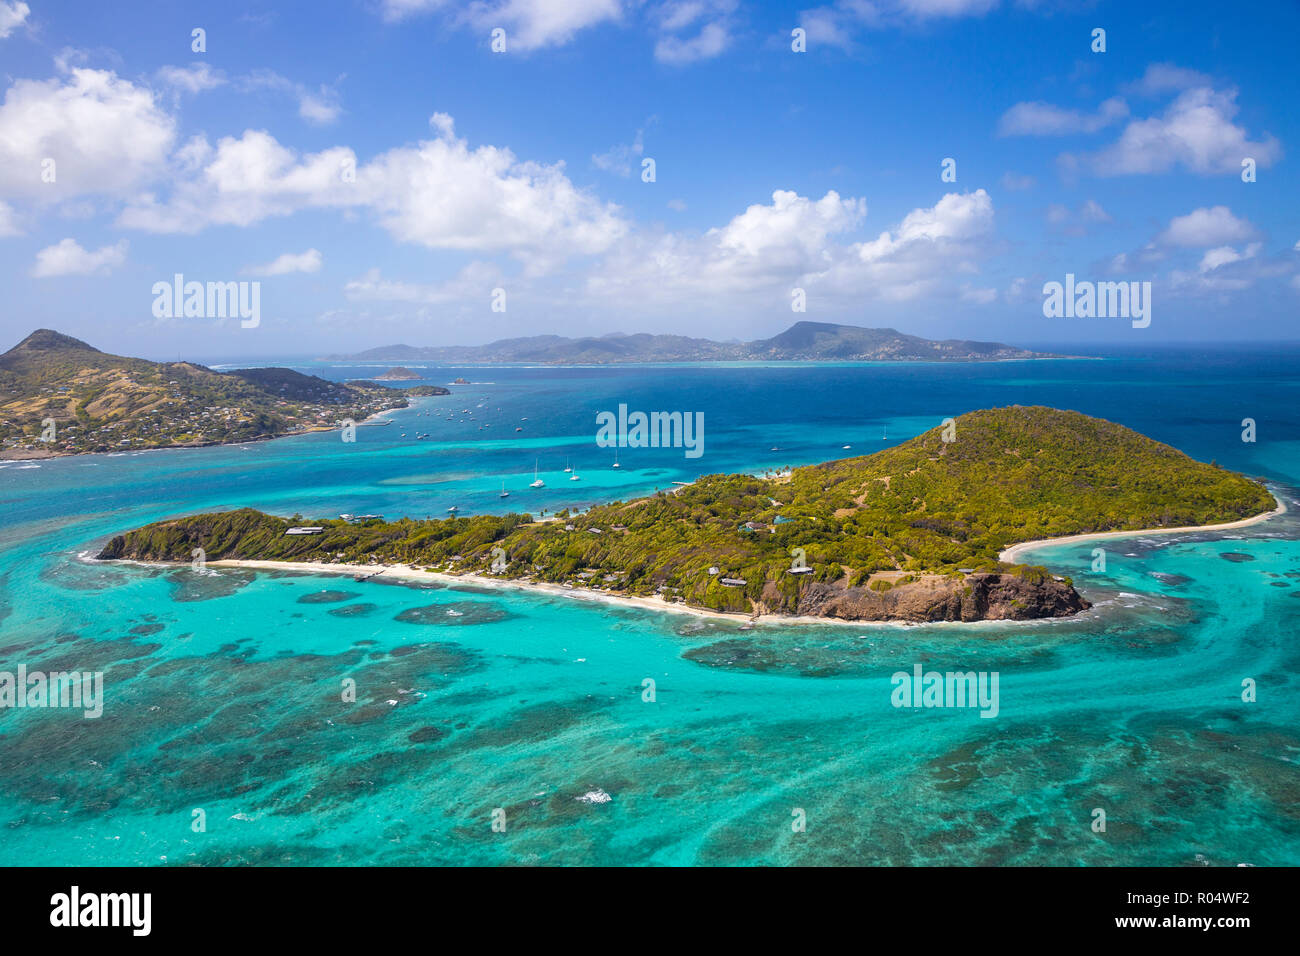 Aerial view of Petit St. Vincent, with Petite Martinique to the left and Carriacou, Grenada in the distance, St. Vincent and The Grenadines Stock Photo